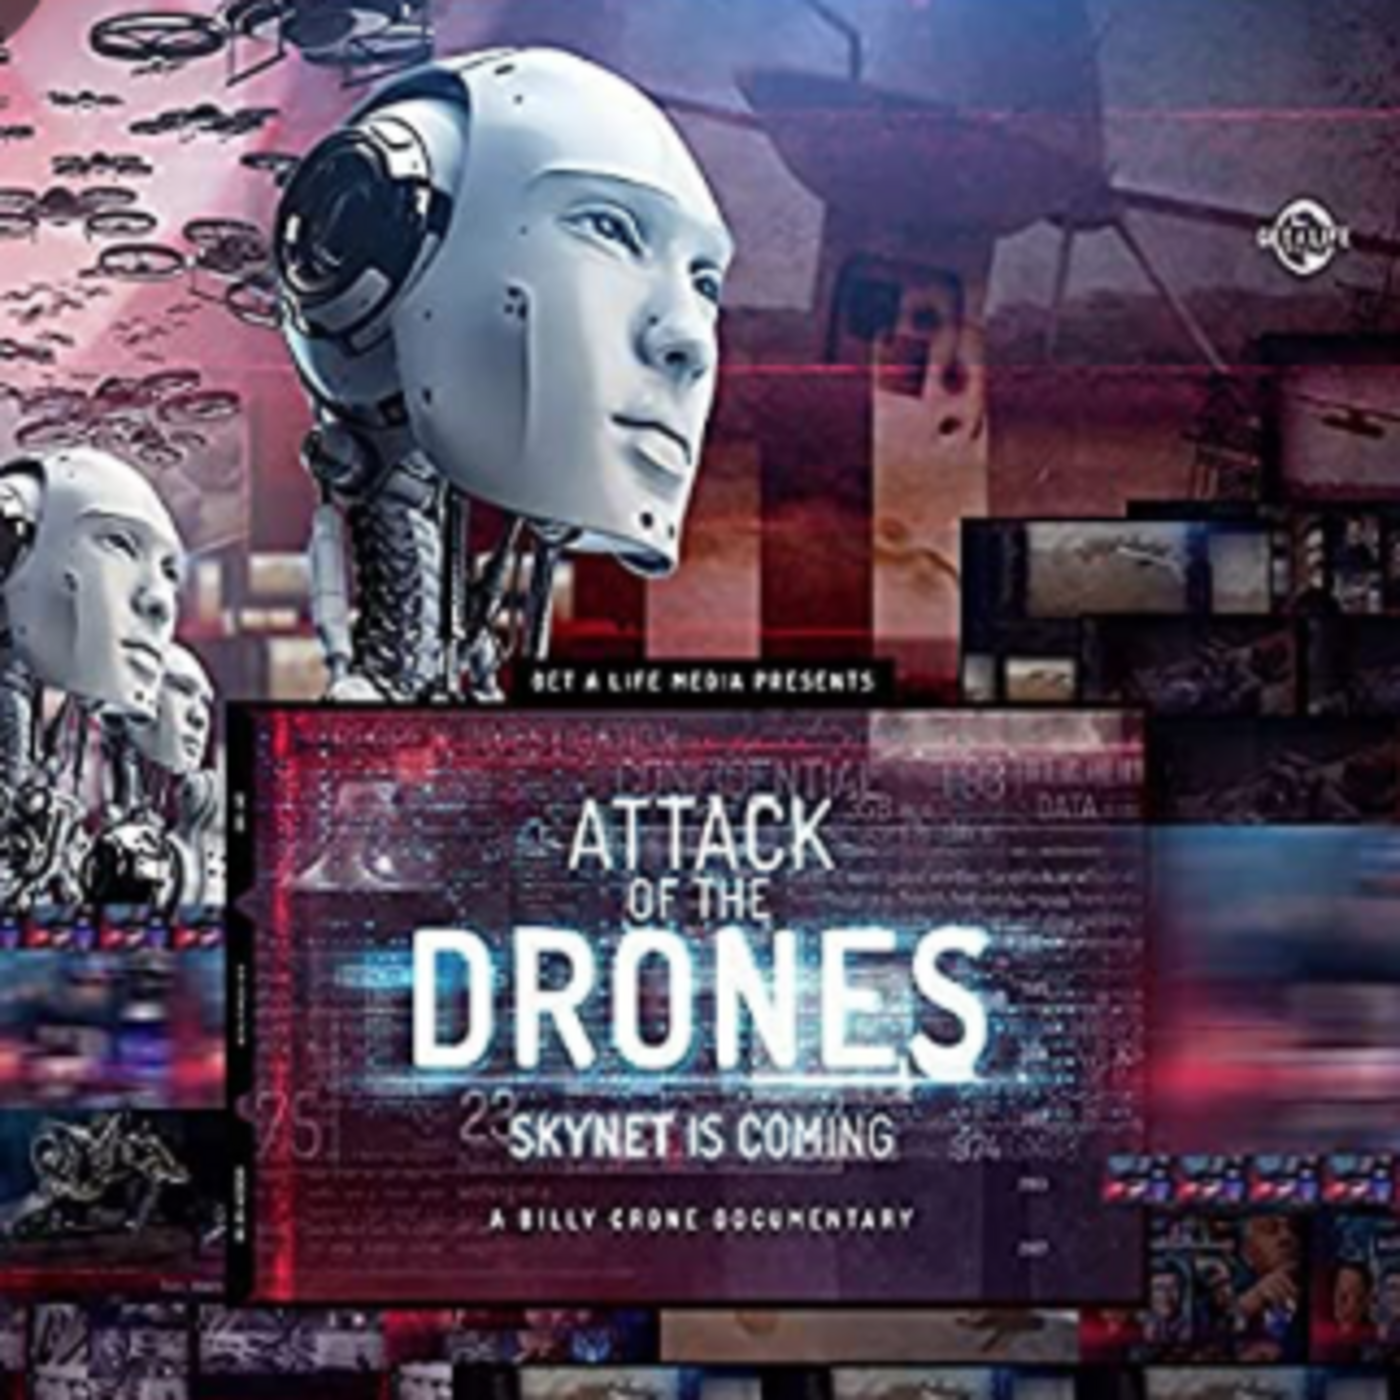 WARNING! Attack of The Drones SKYNET Is Coming!